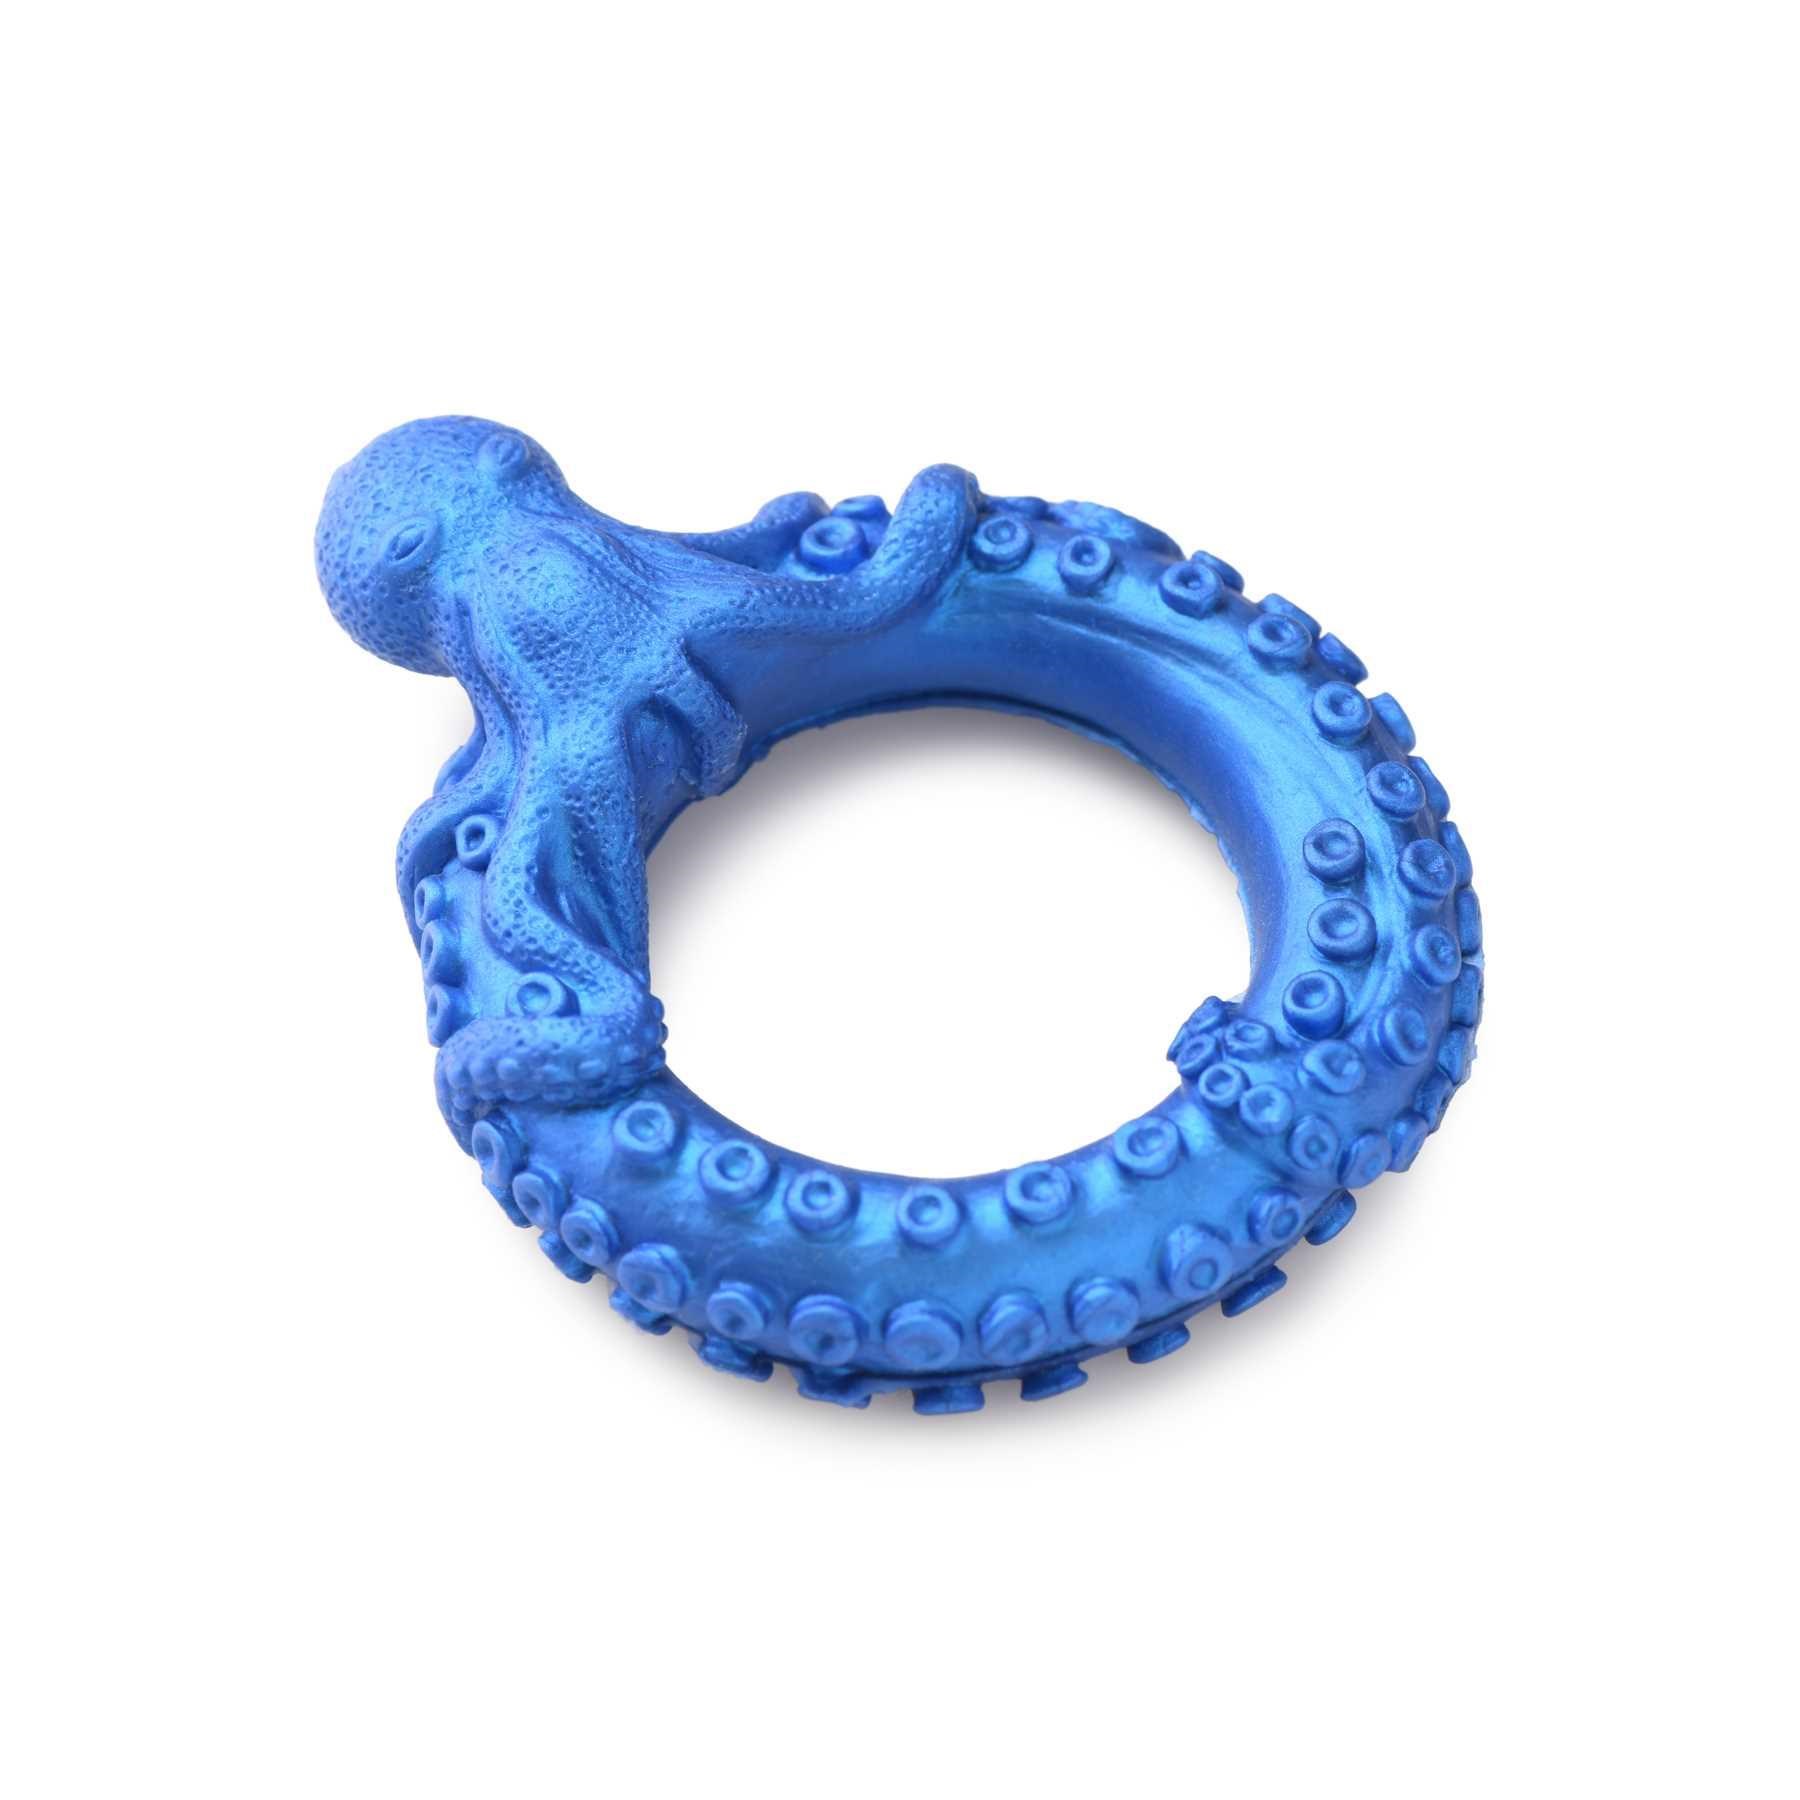 Creature Cocks Poseidon's Octo-Ring Silicone Cock Ring laying flat on table